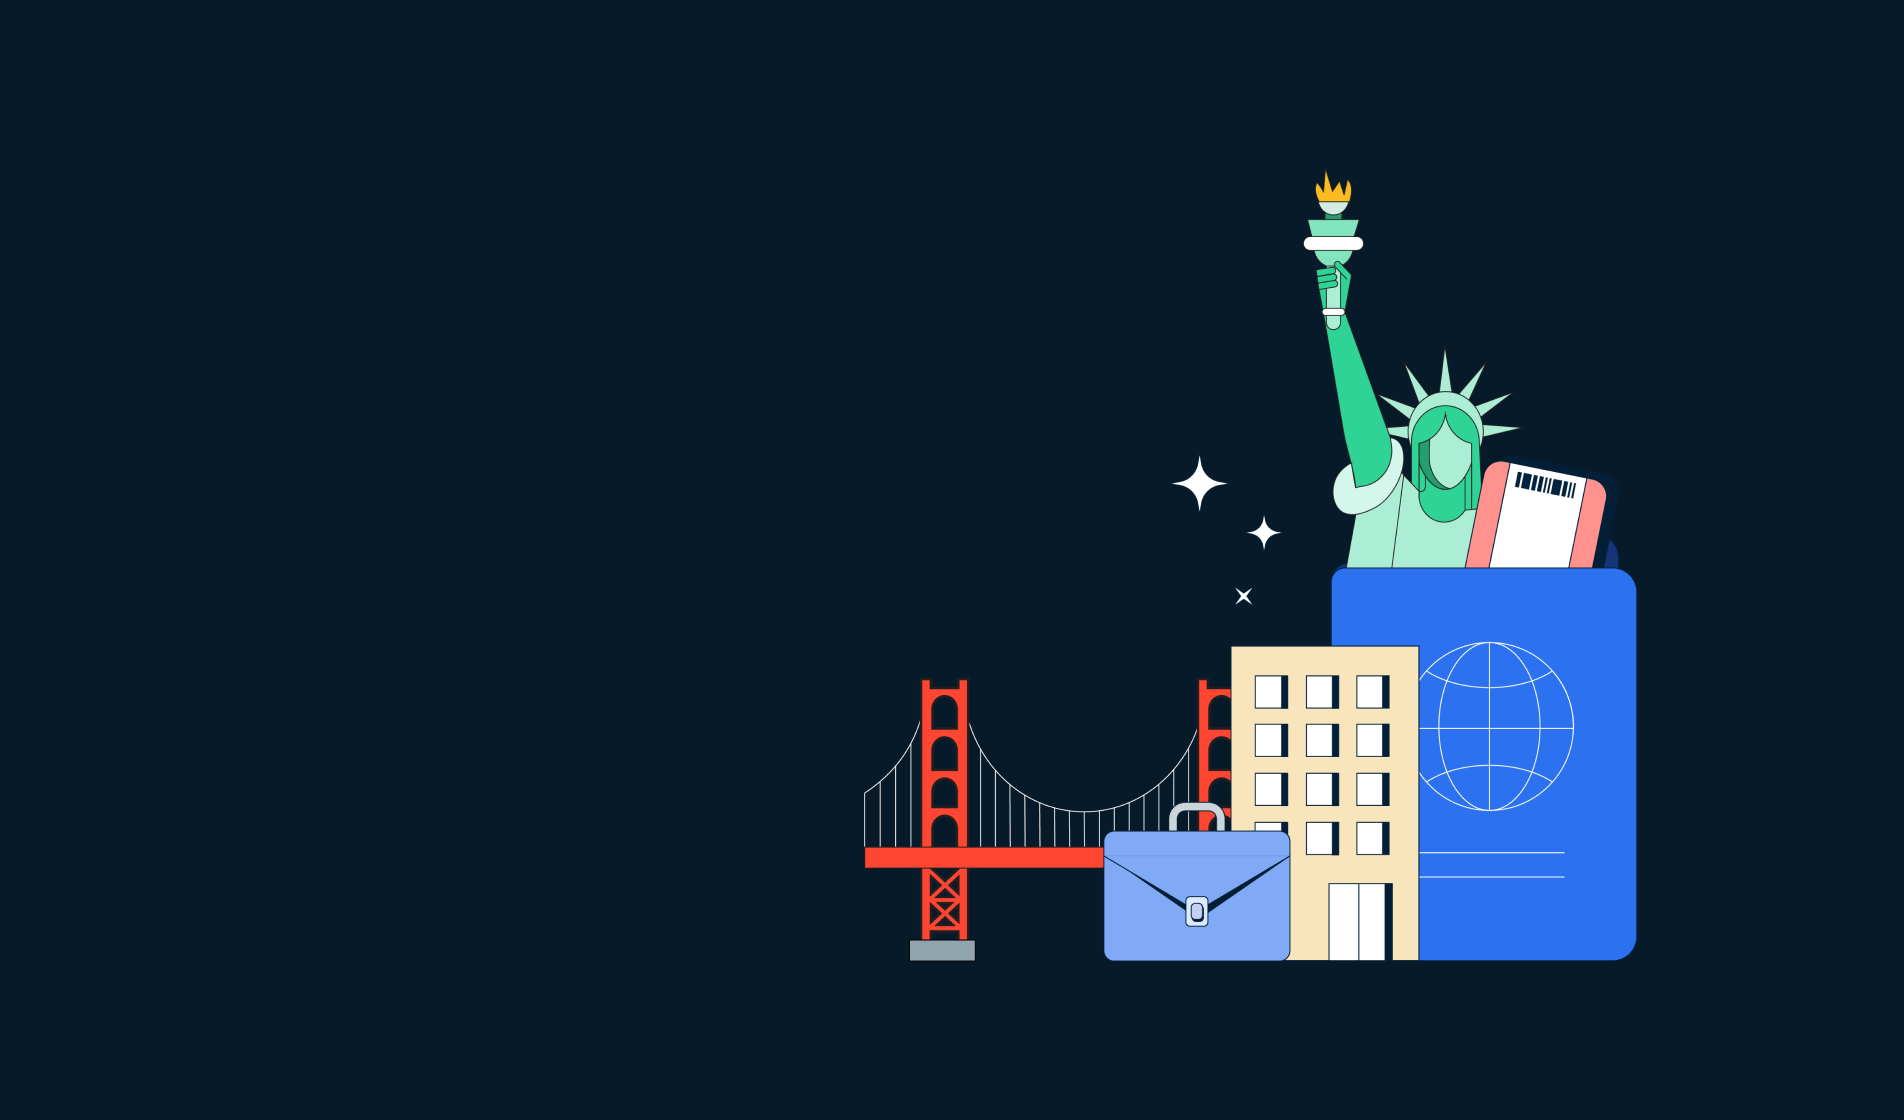 A Guide to Scaling AU and NZ Startups in the US